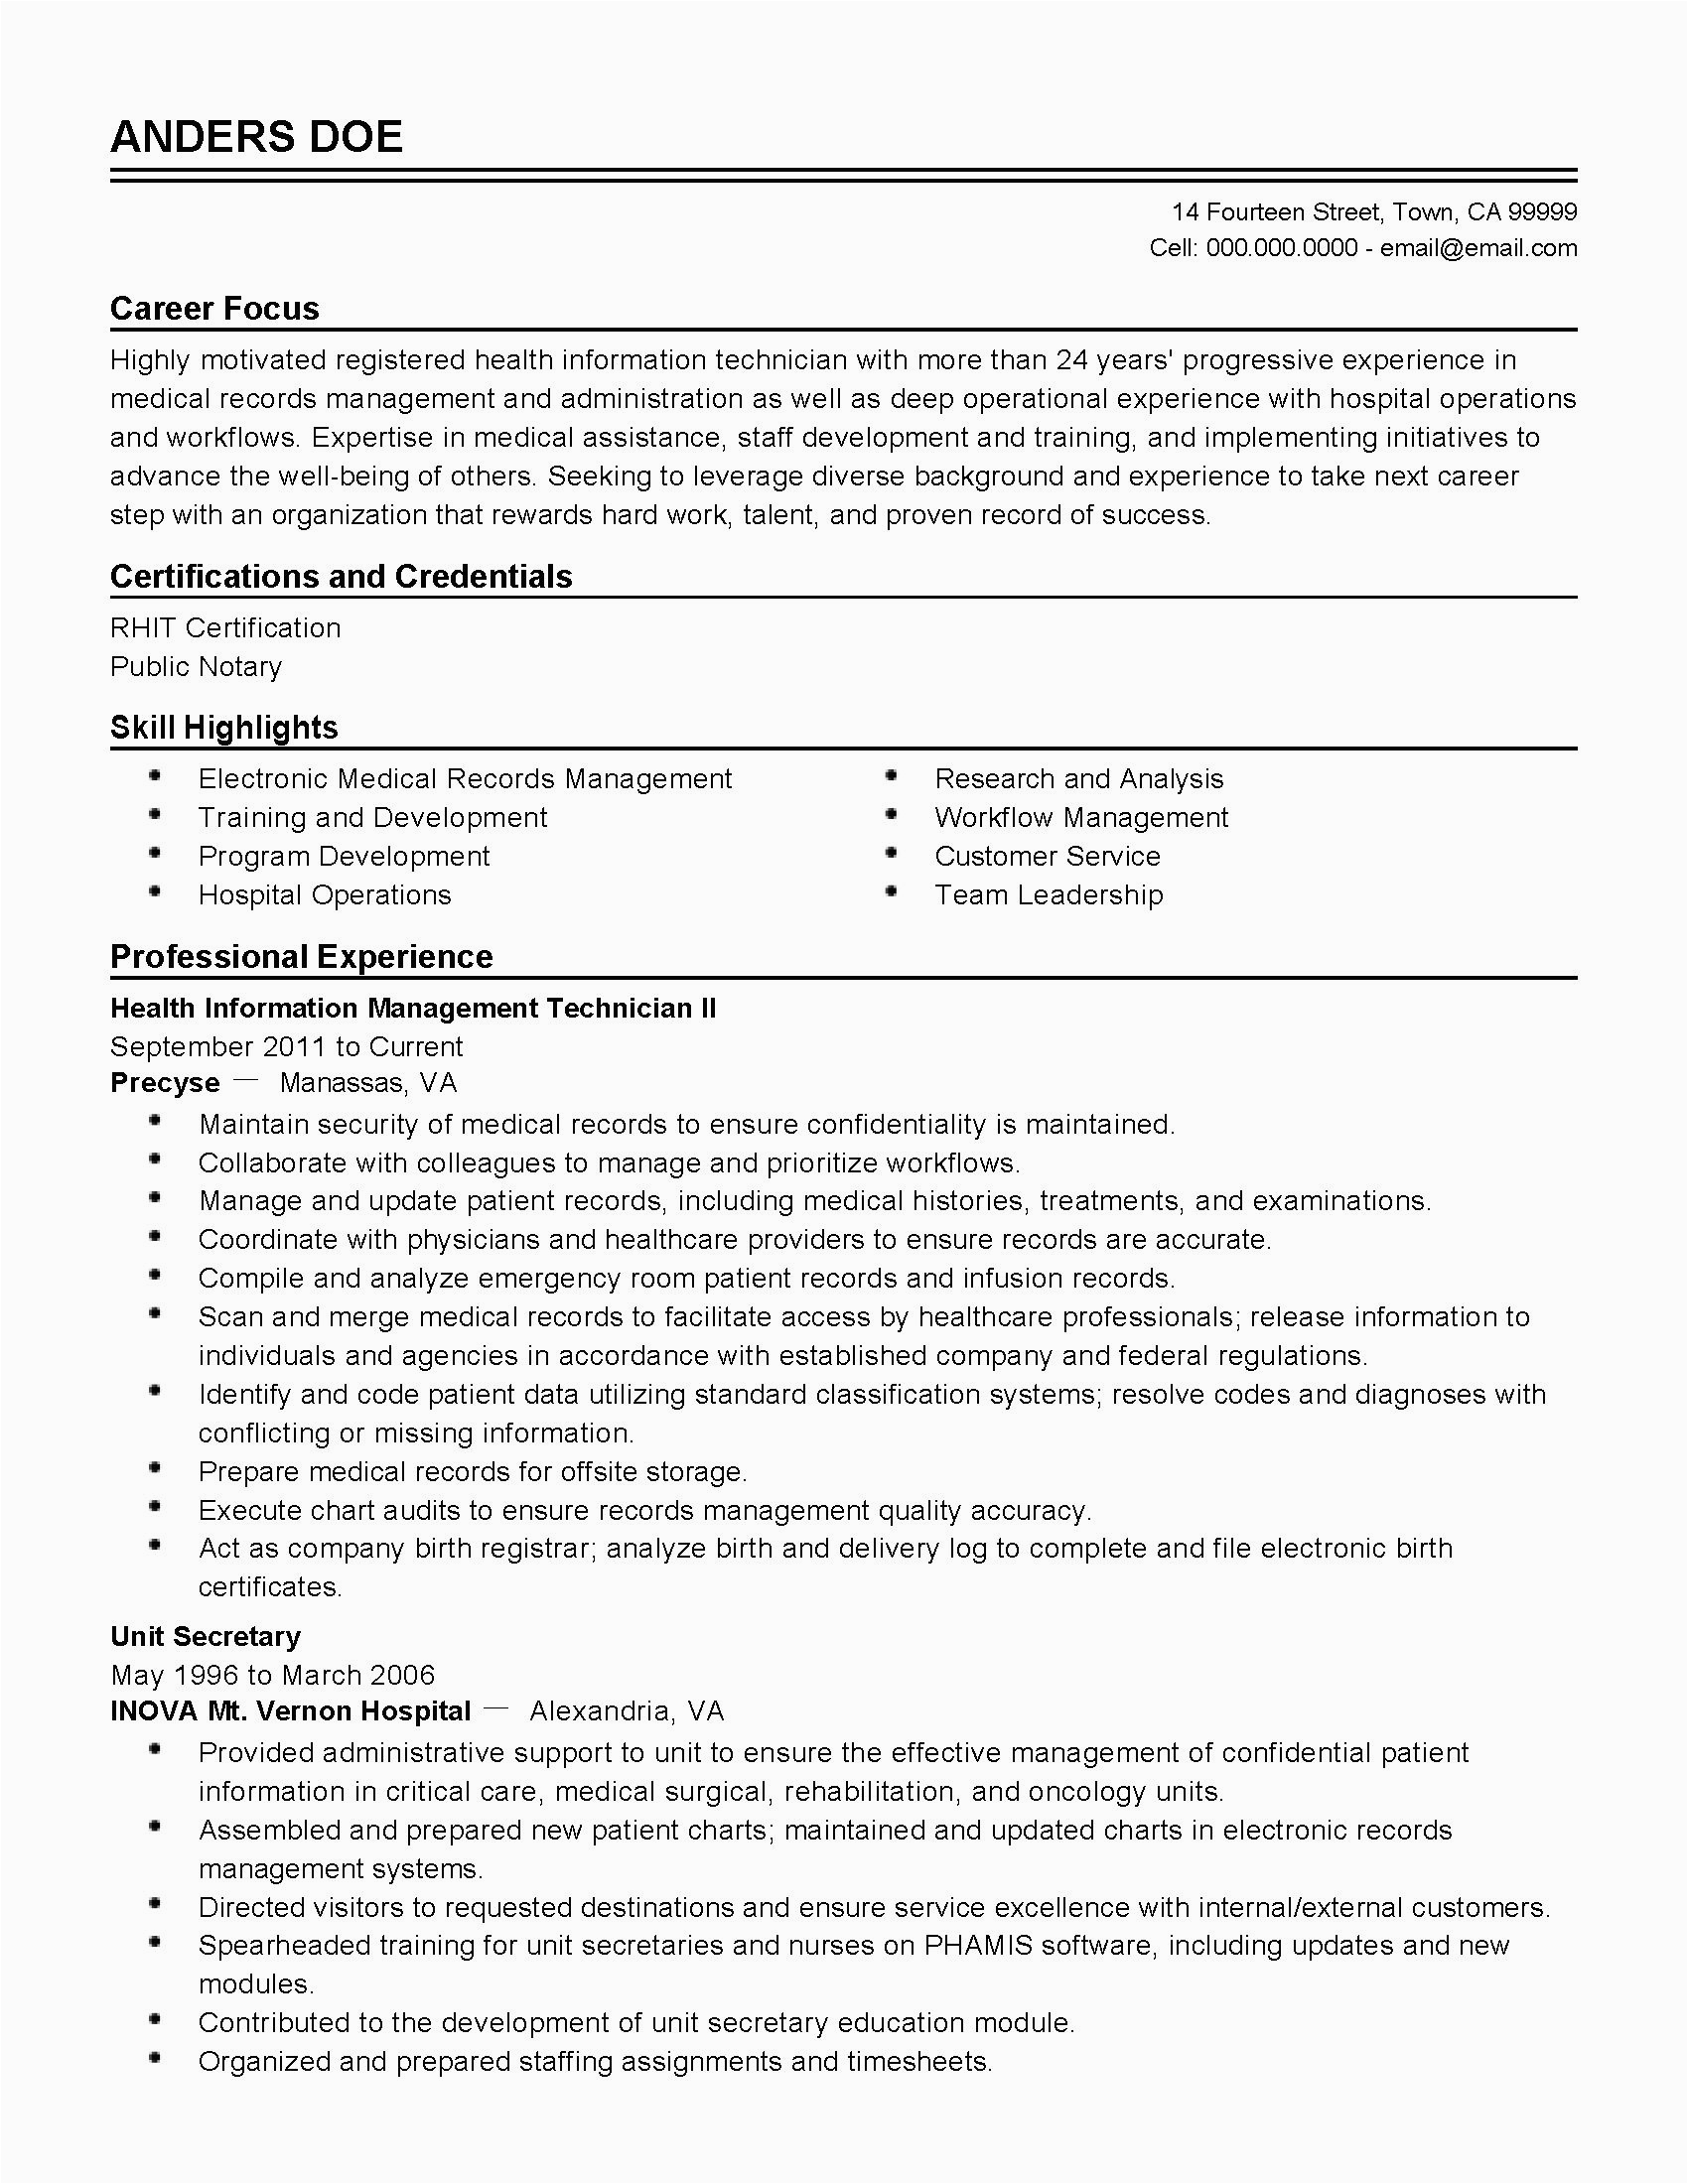 Sample Resume for A Healthcare It Professional Health Information Management Resume Lovely Professional Health